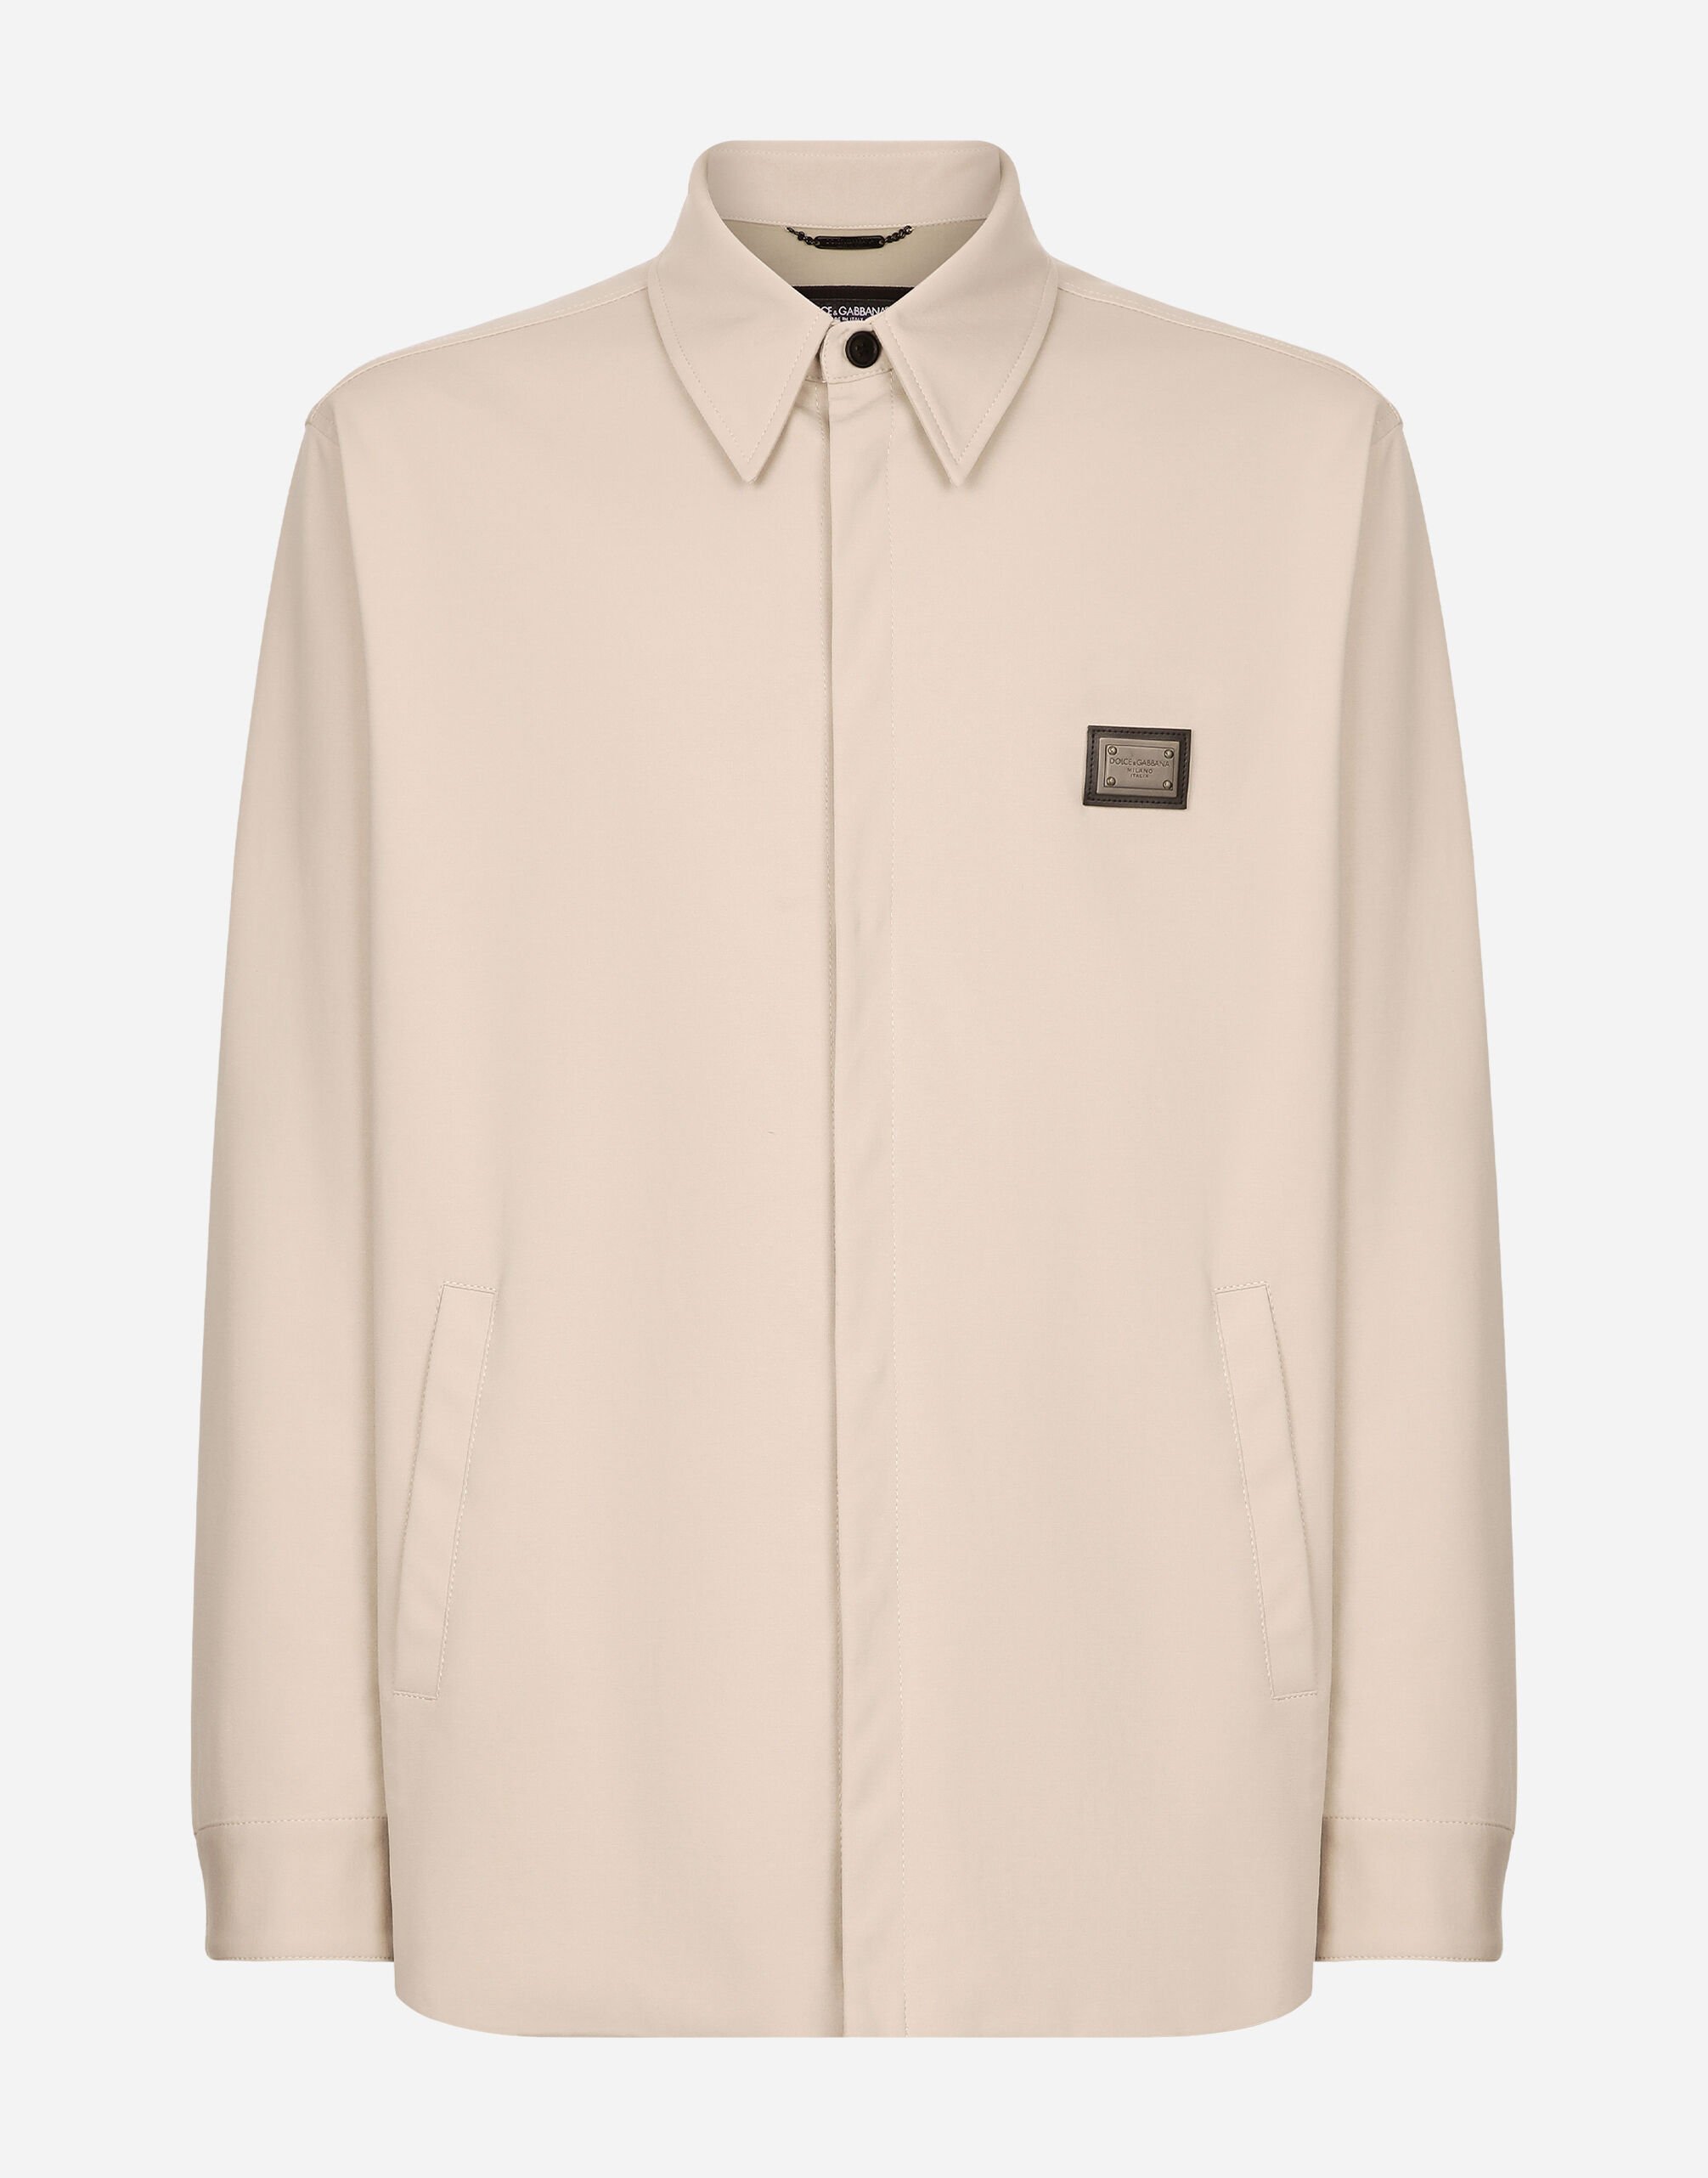 Dolce & Gabbana Technical fabric shirt with tag Beige G9AOGTGH459